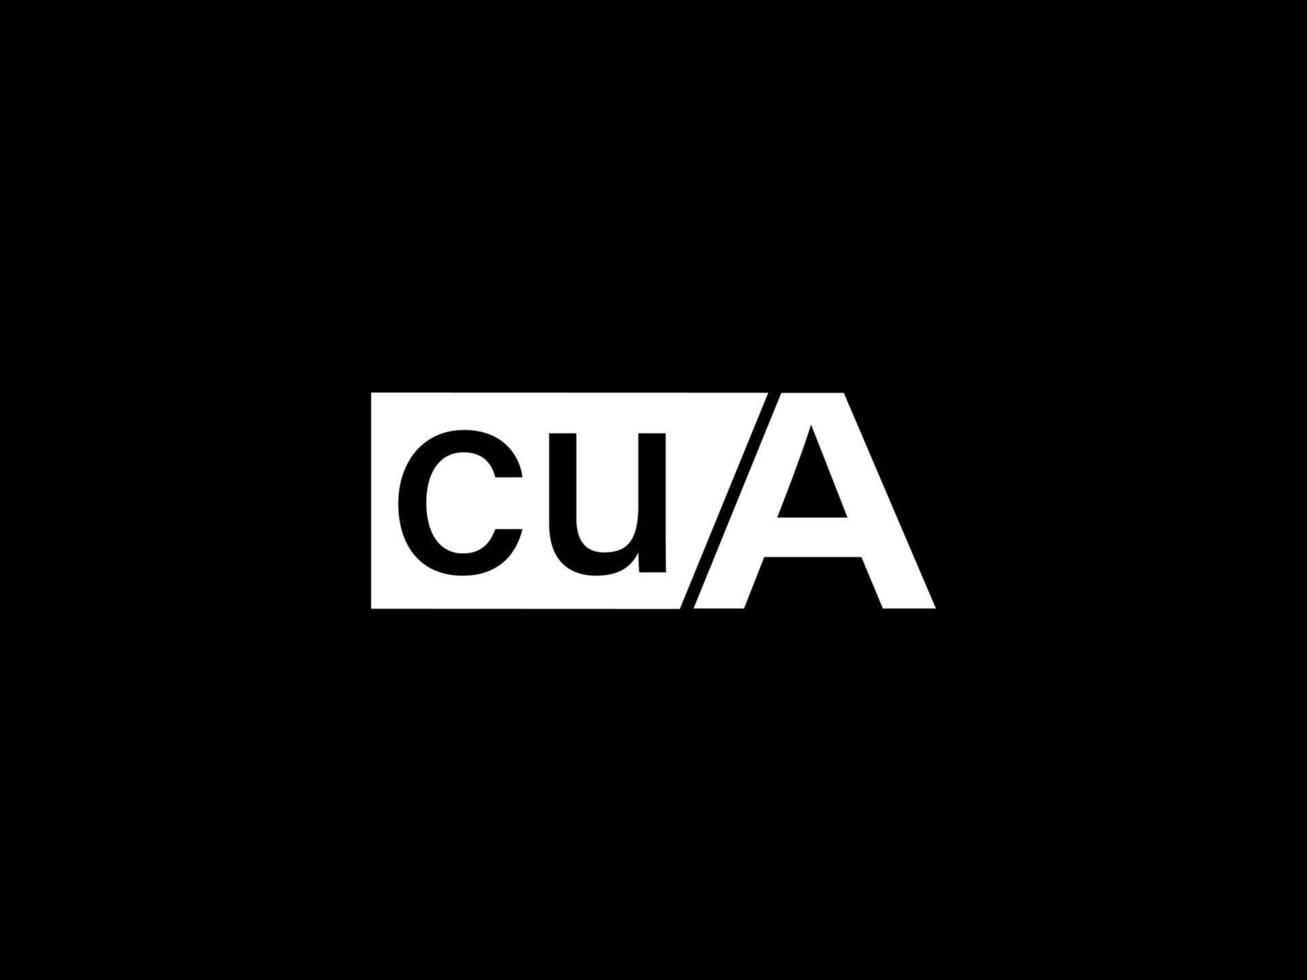 CUA Logo and Graphics design vector art, Icons isolated on black background